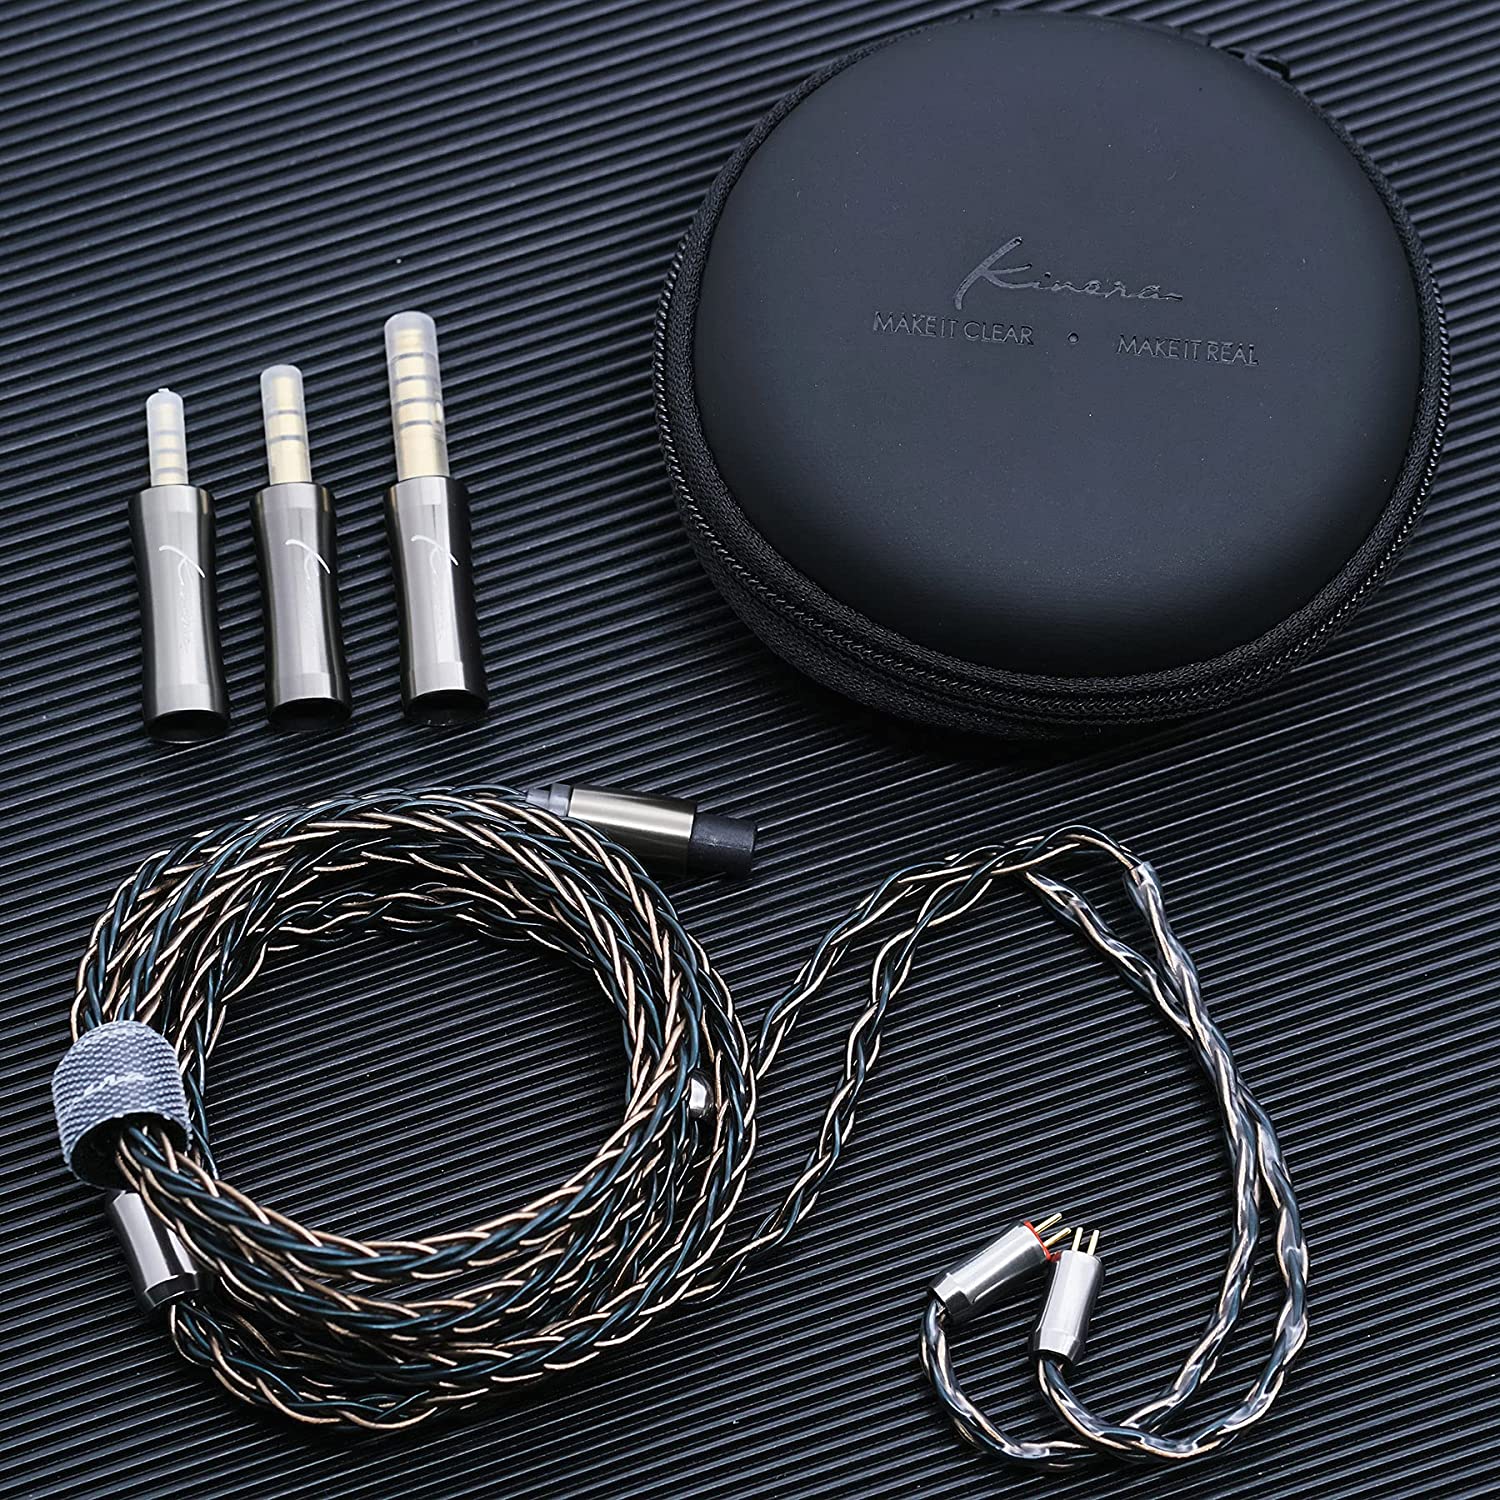 Kinera Leyding OFC+Alloy Copper With 5N Silver Plated Cable